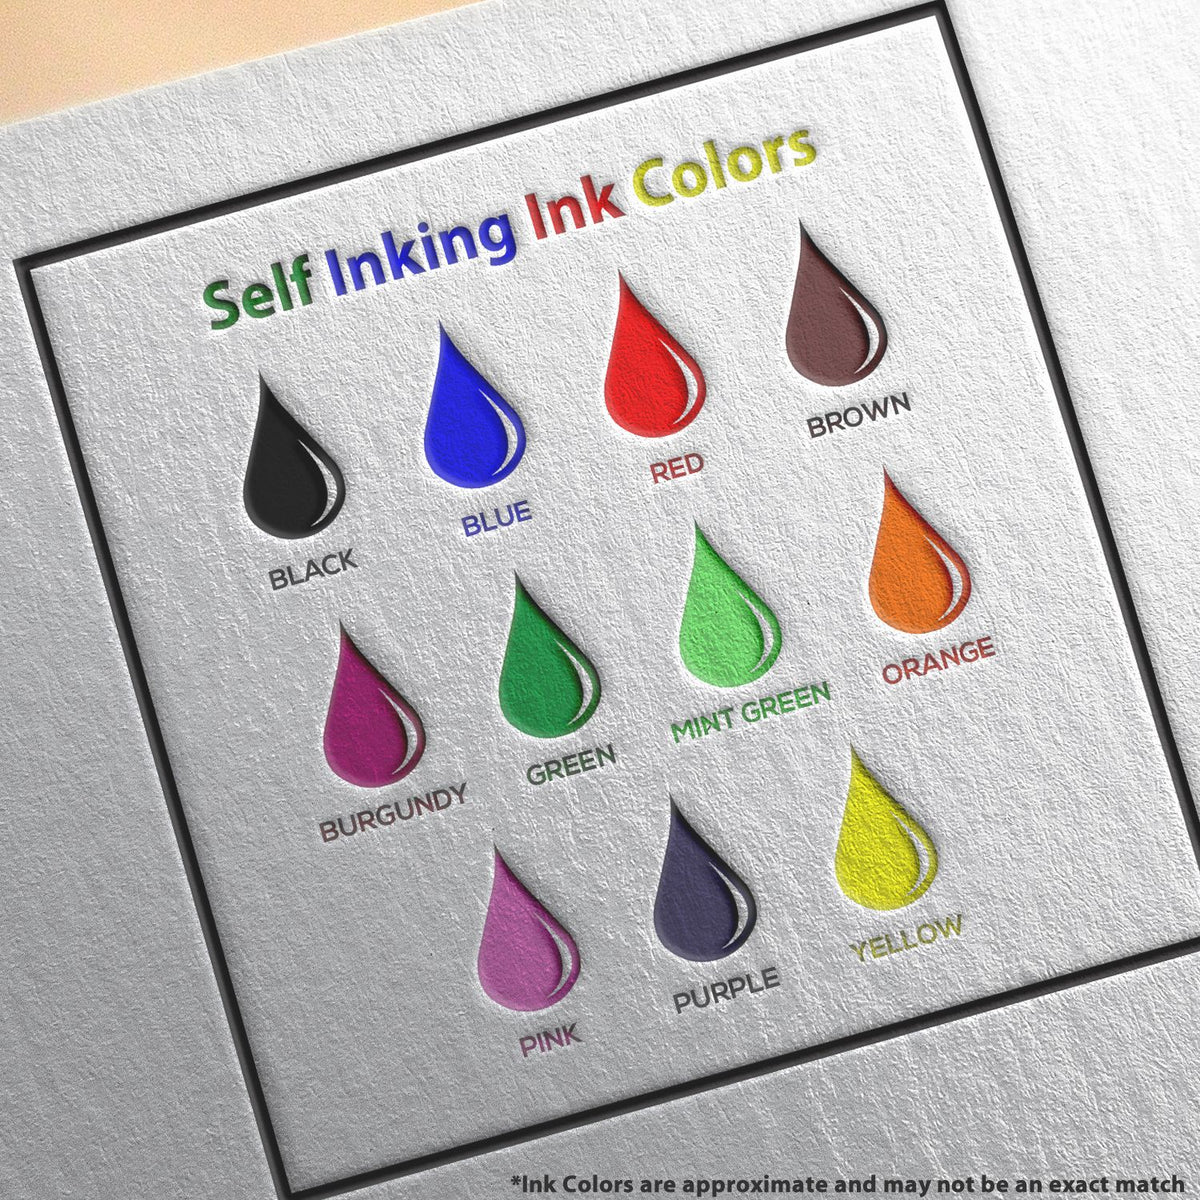 A picture showing the different ink colors or hues available for the Self-Inking Michigan PE Stamp product.